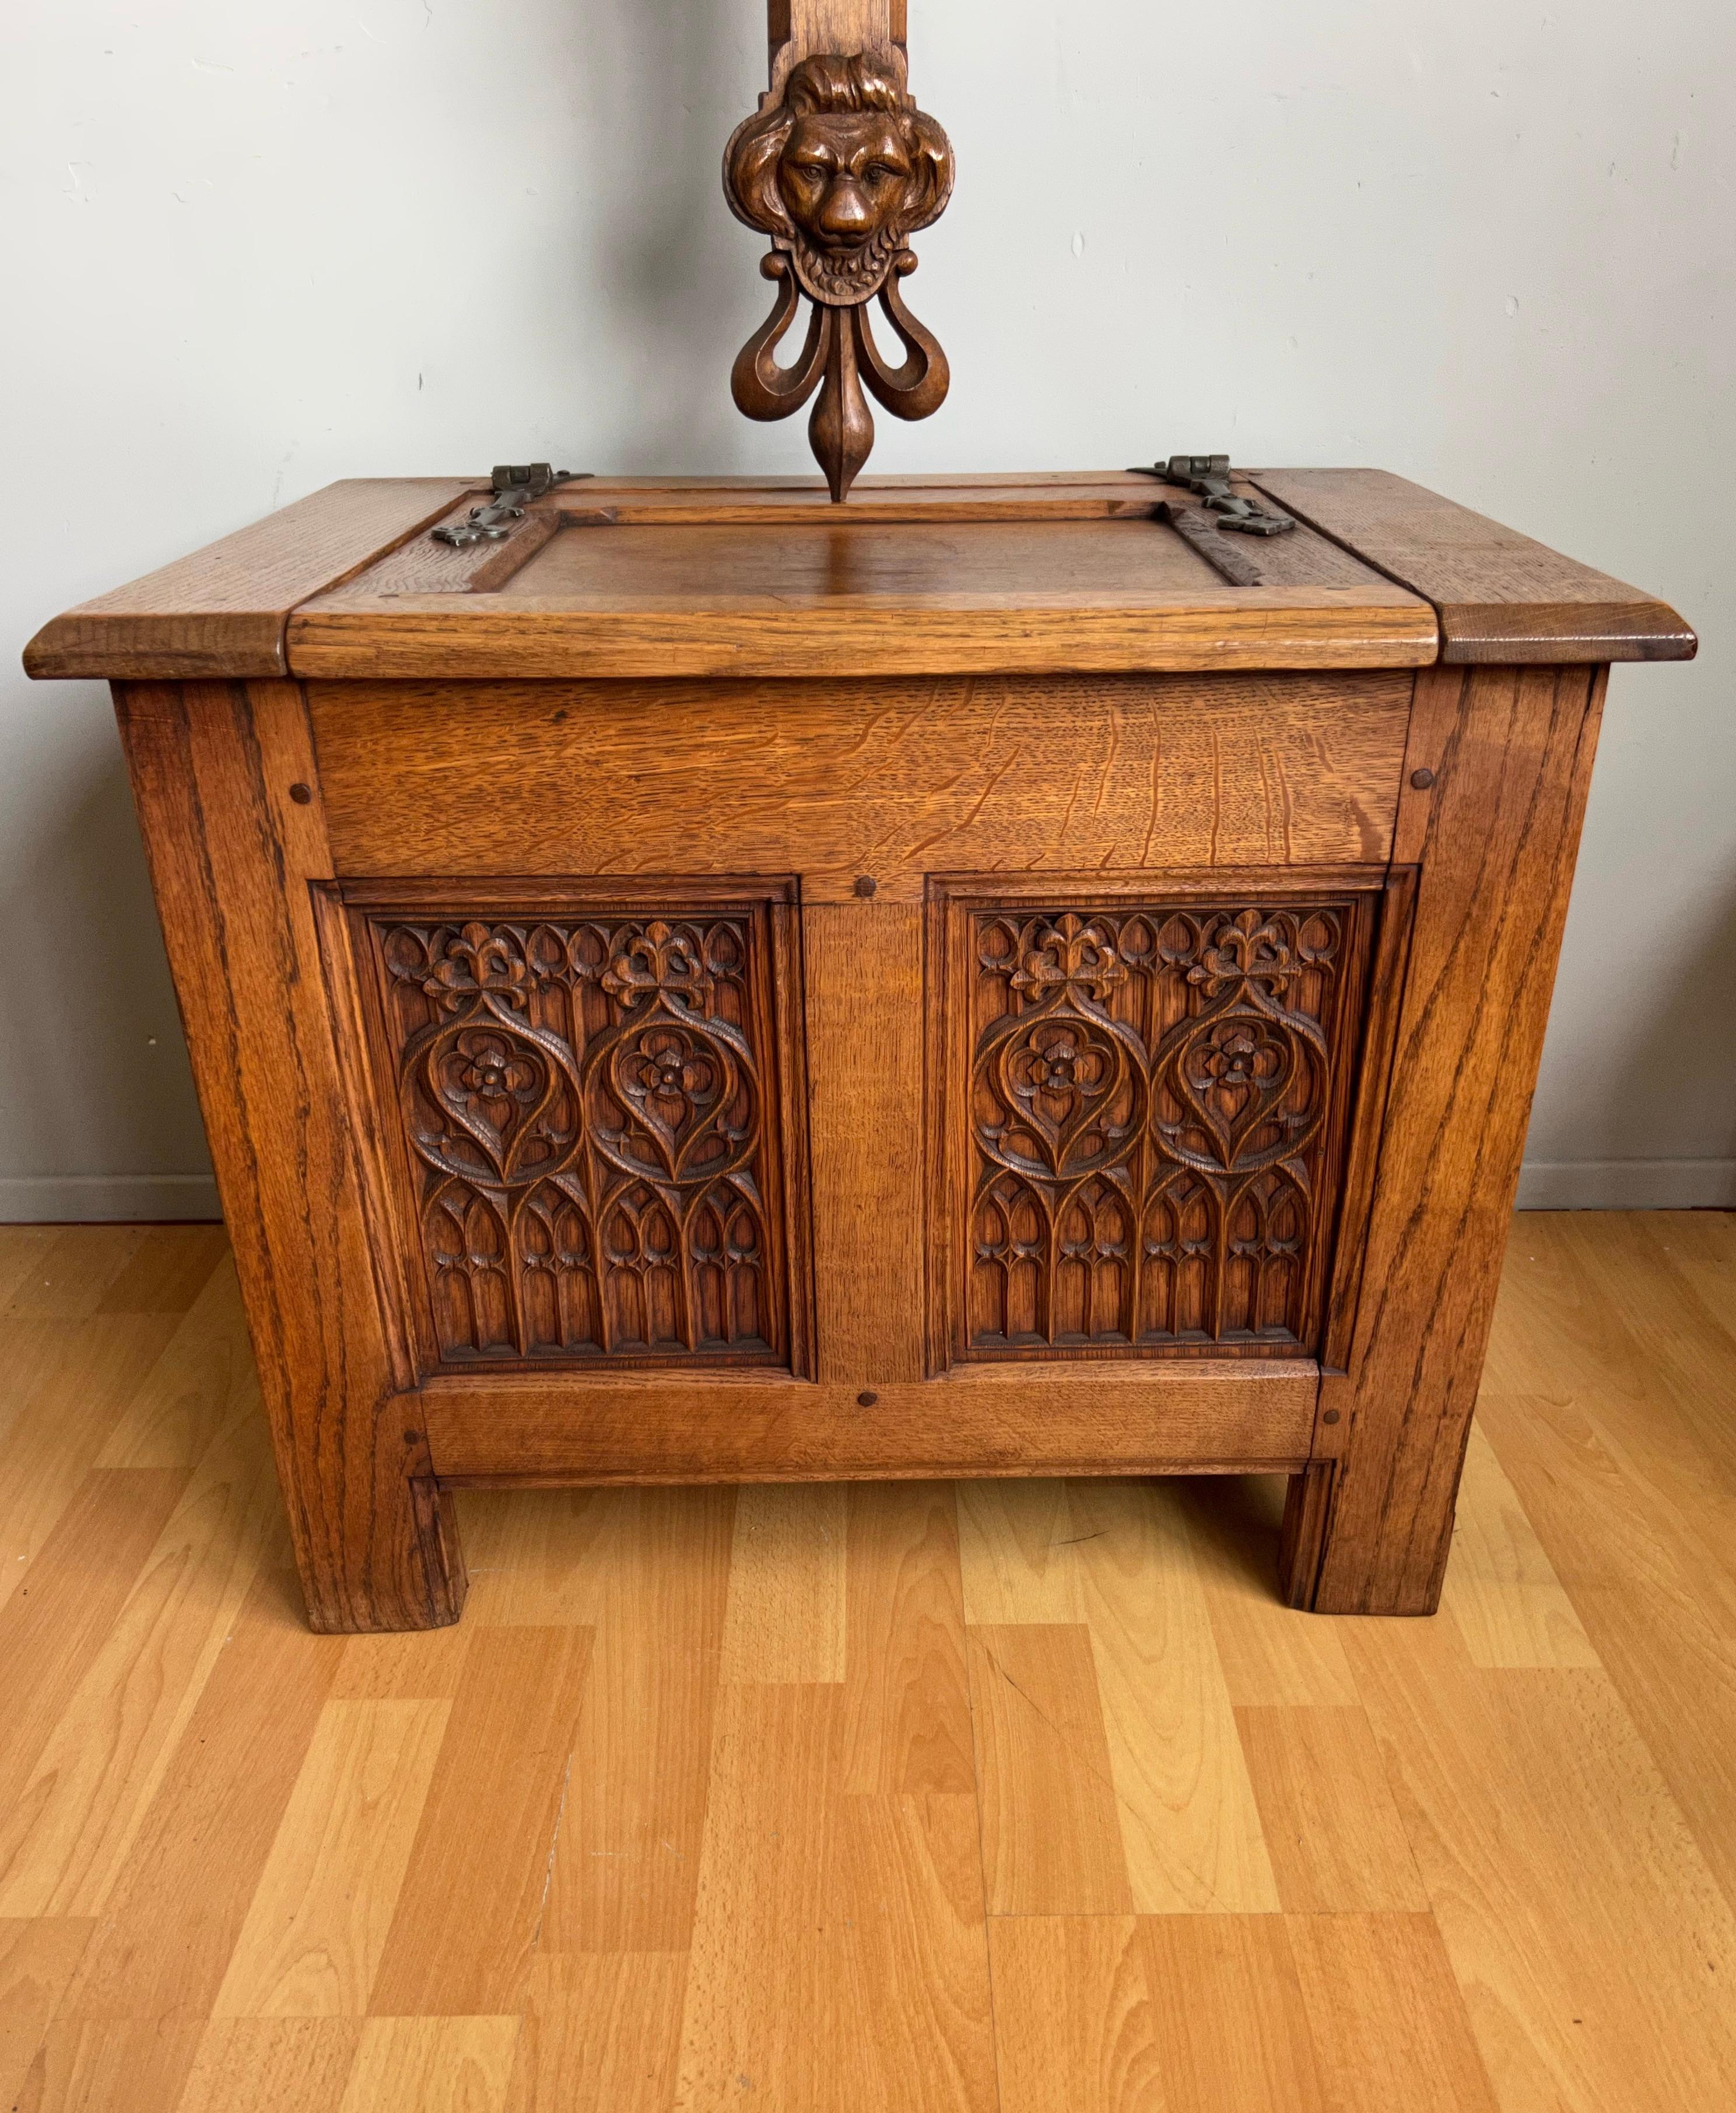 Stunning and practical size, multi purpose Gothic chest / box from a monastery.

This here Gothic chest is one of the smallest yet most stylish we ever had the pleasure of offering. It is entirely hand-crafted and hand carved out of solid oak and